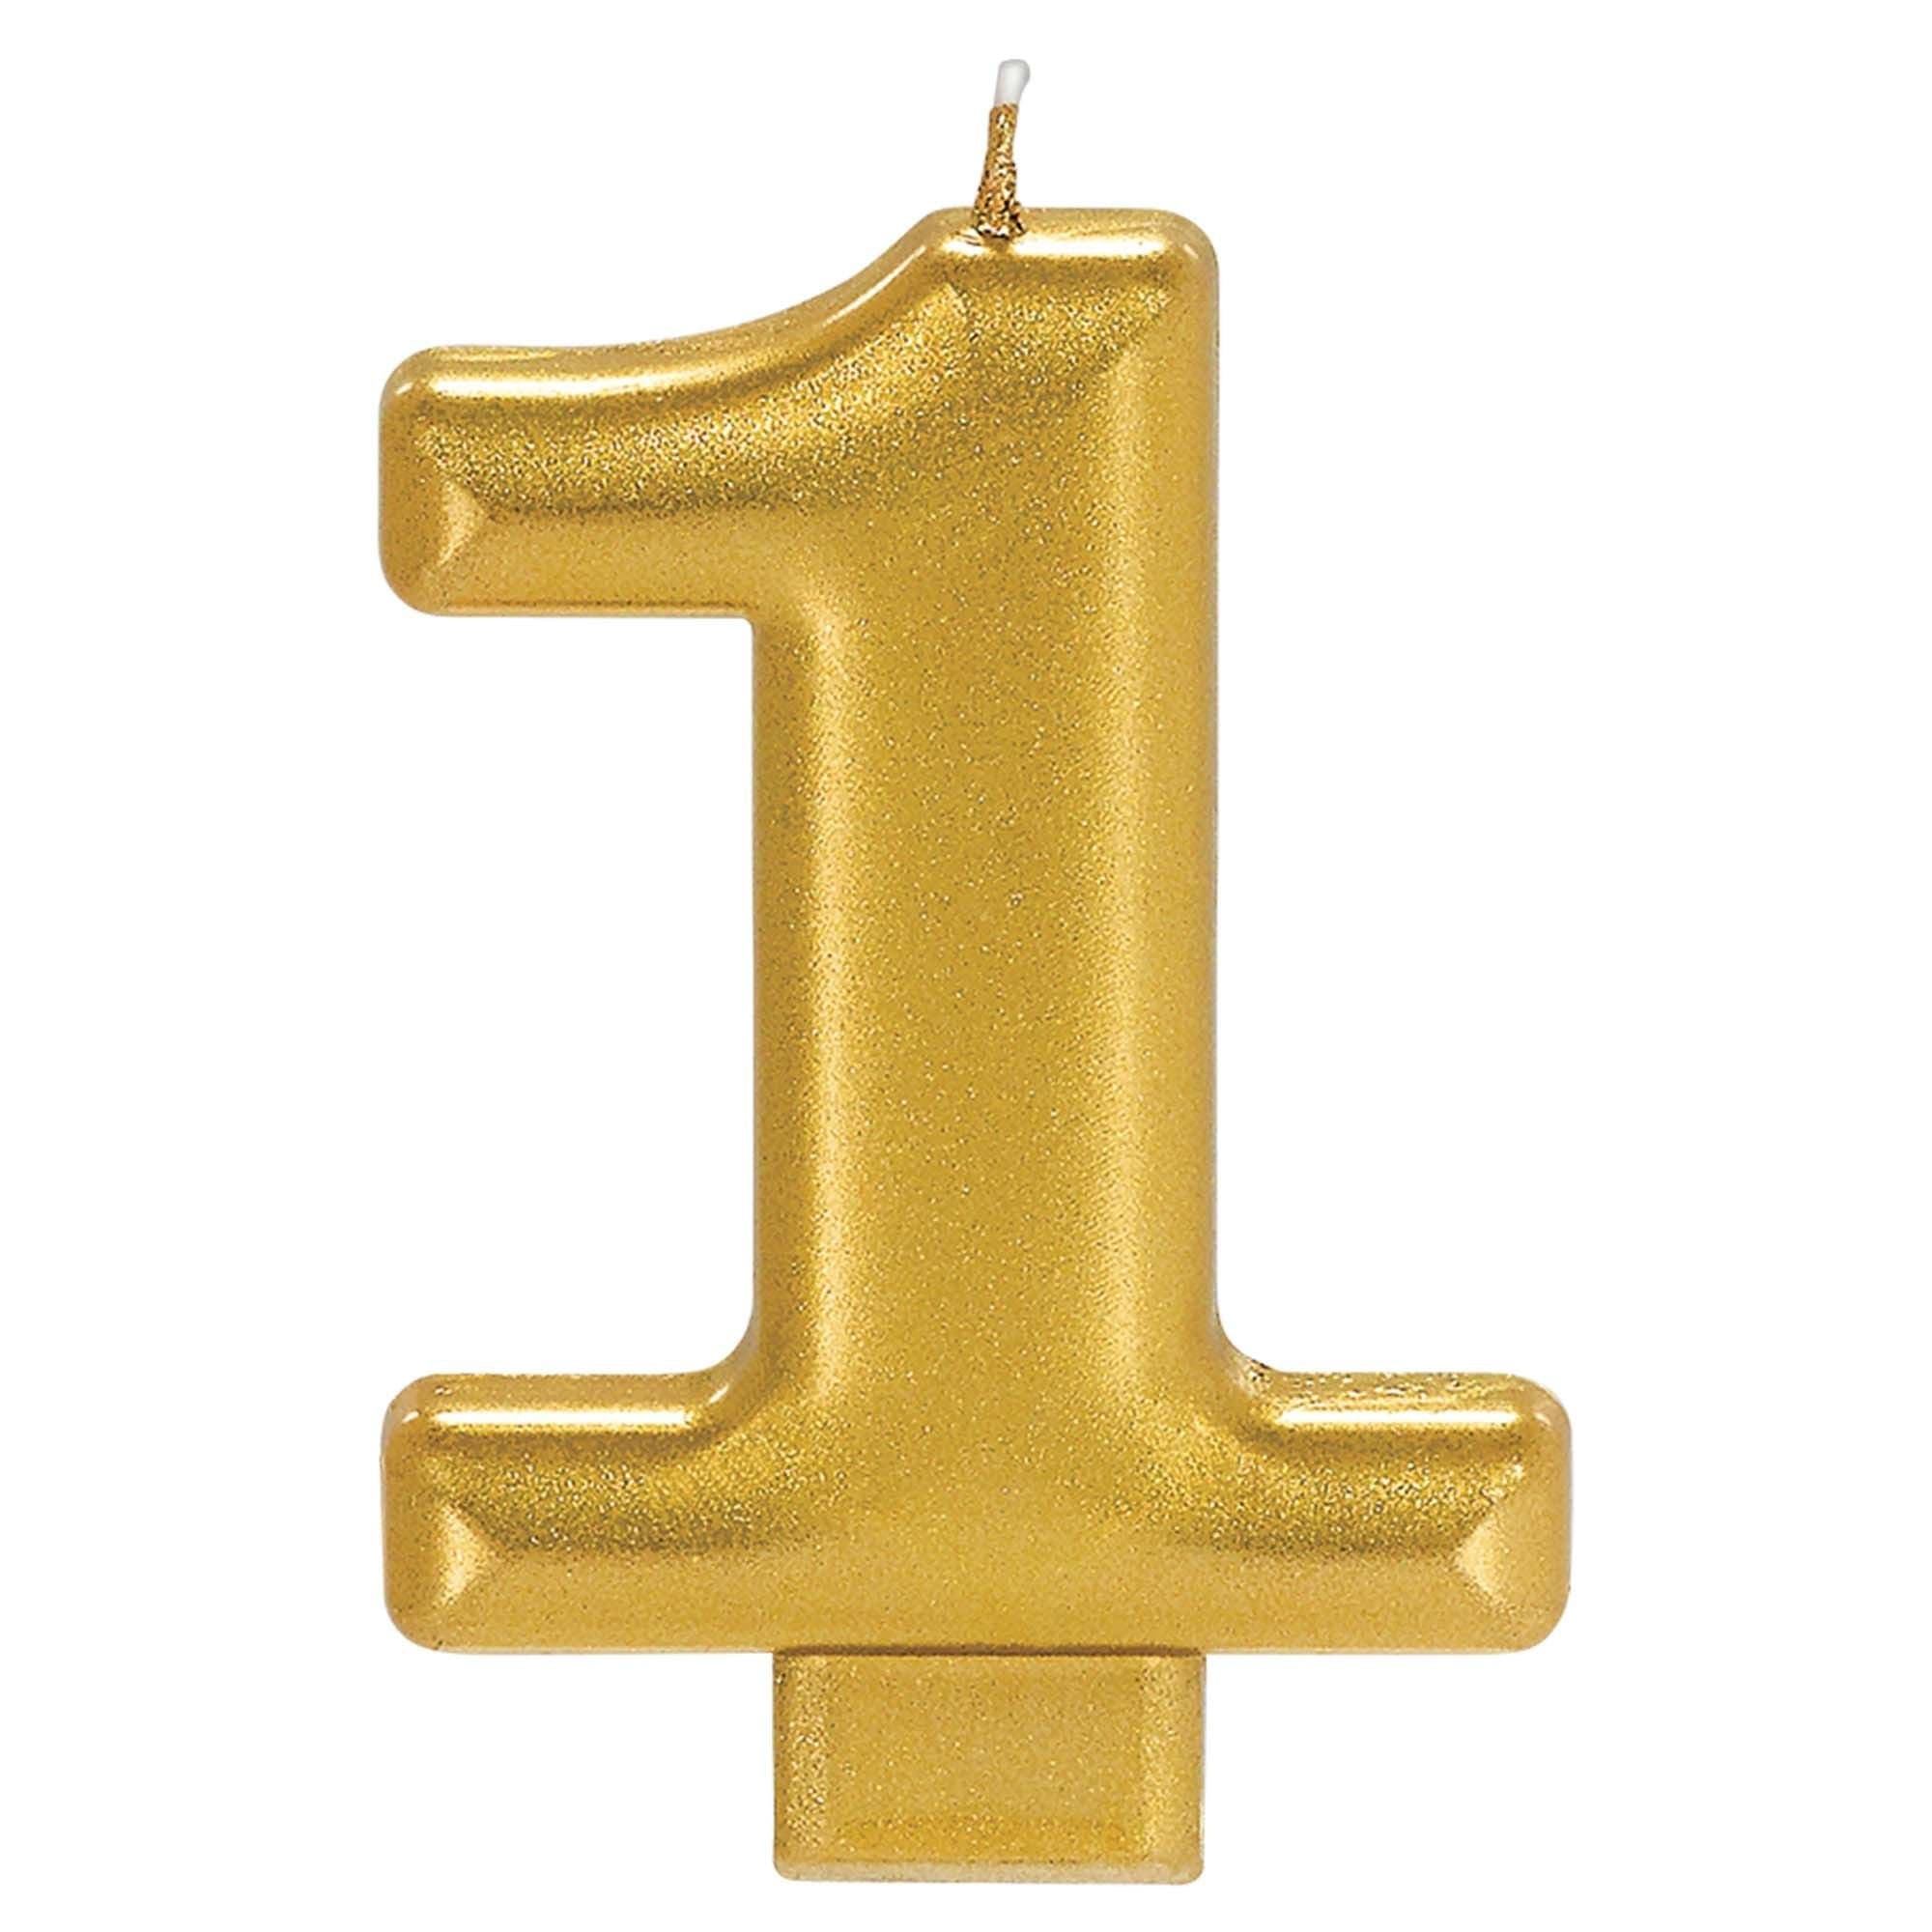 Amscan CANDLES Numeral #1 Metallic Candle - Gold